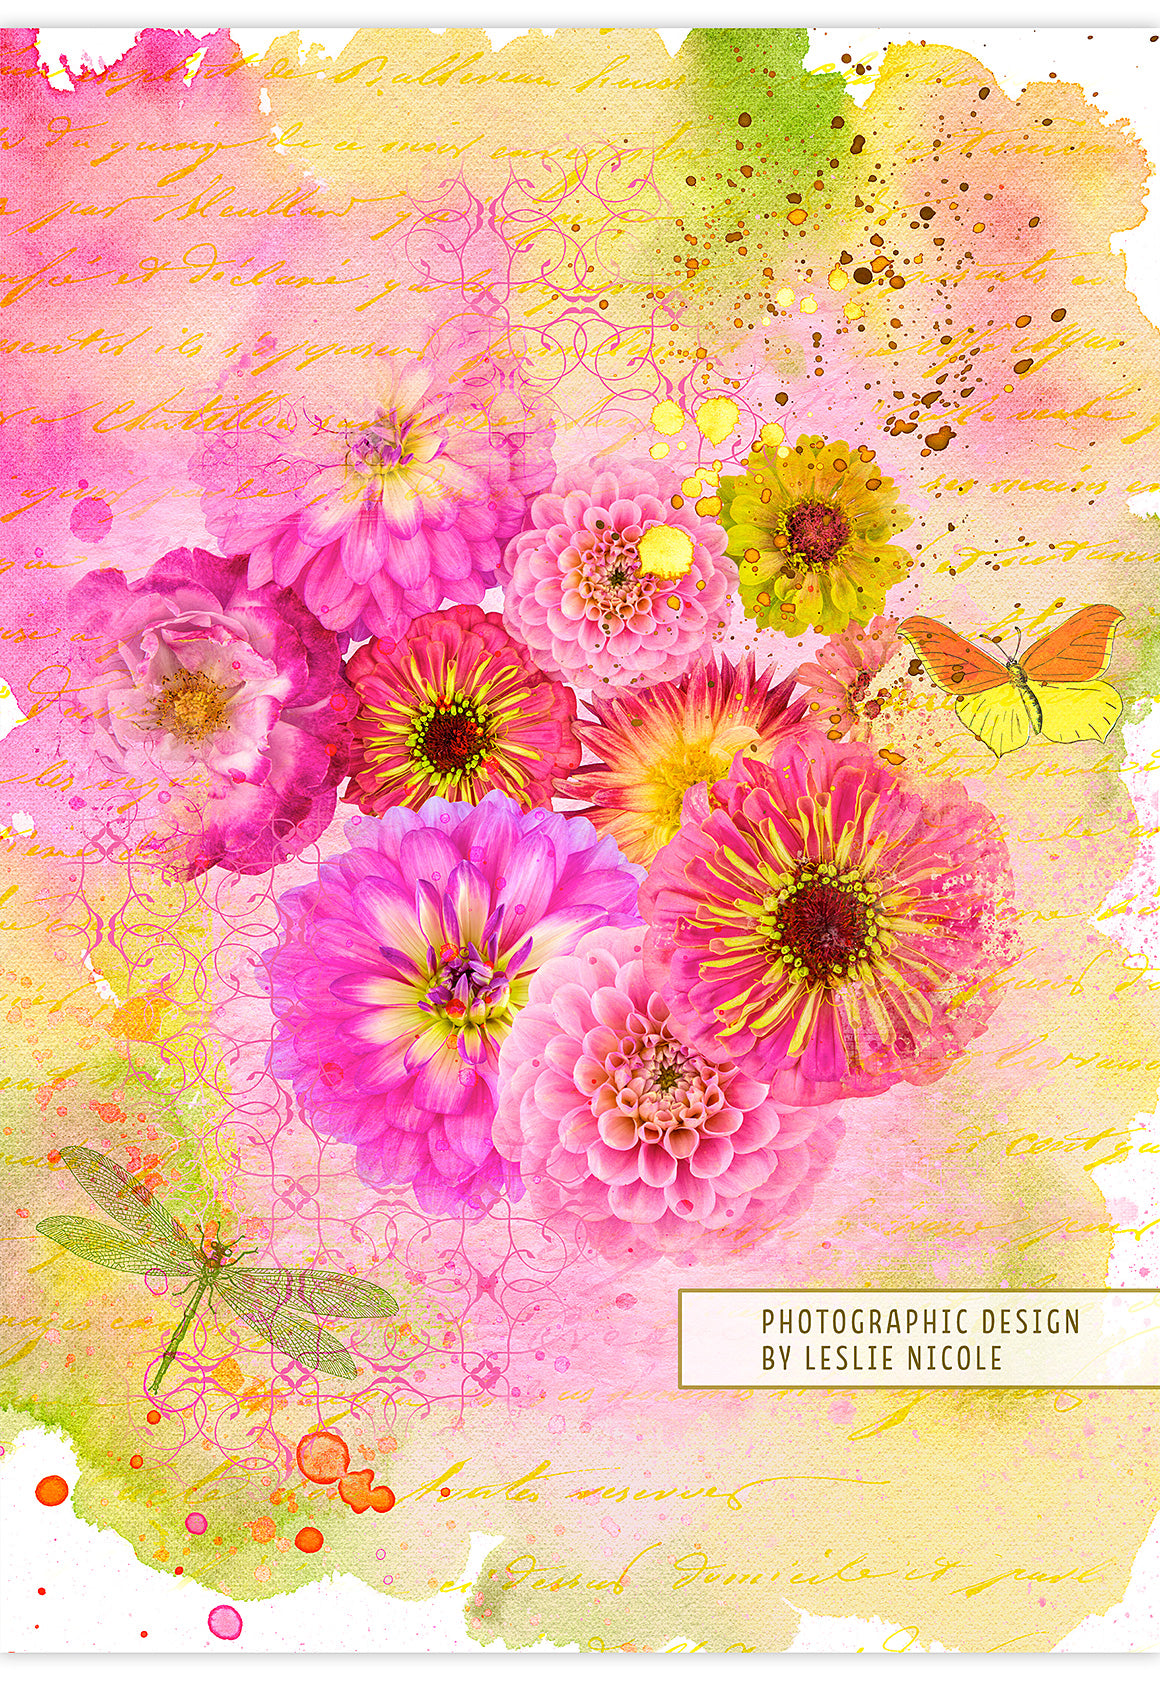 Photographic design with flowers, watercolor textures, patterns and other elements.